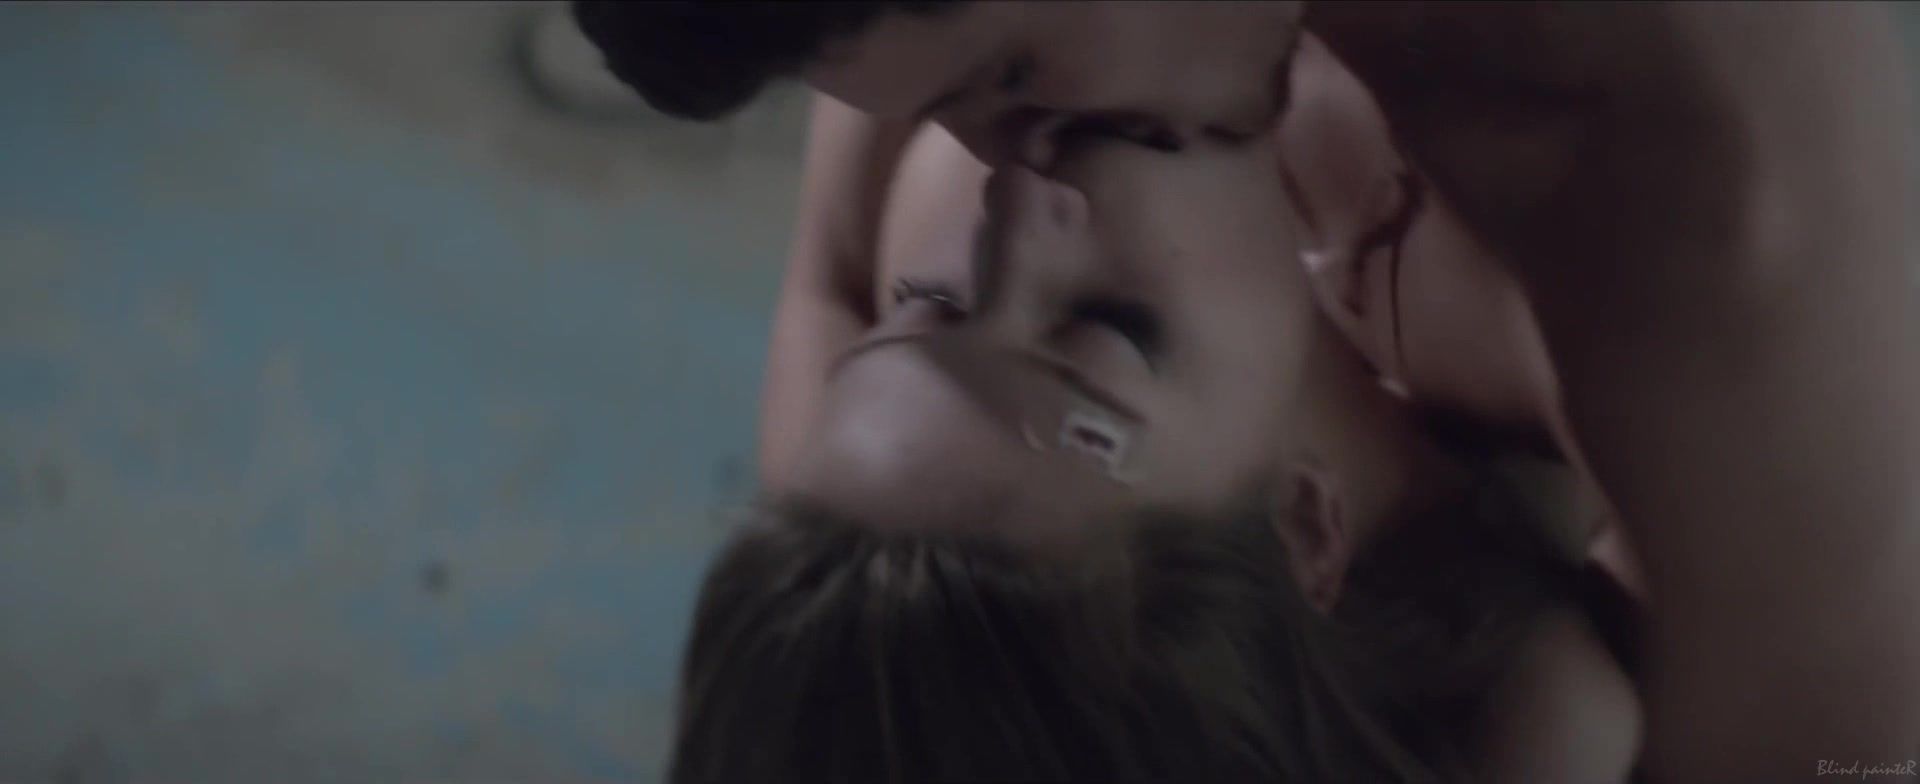 Dick Sucking Sex video Adele Exarchopoulos nude - Fire (2015) PlayForceOne